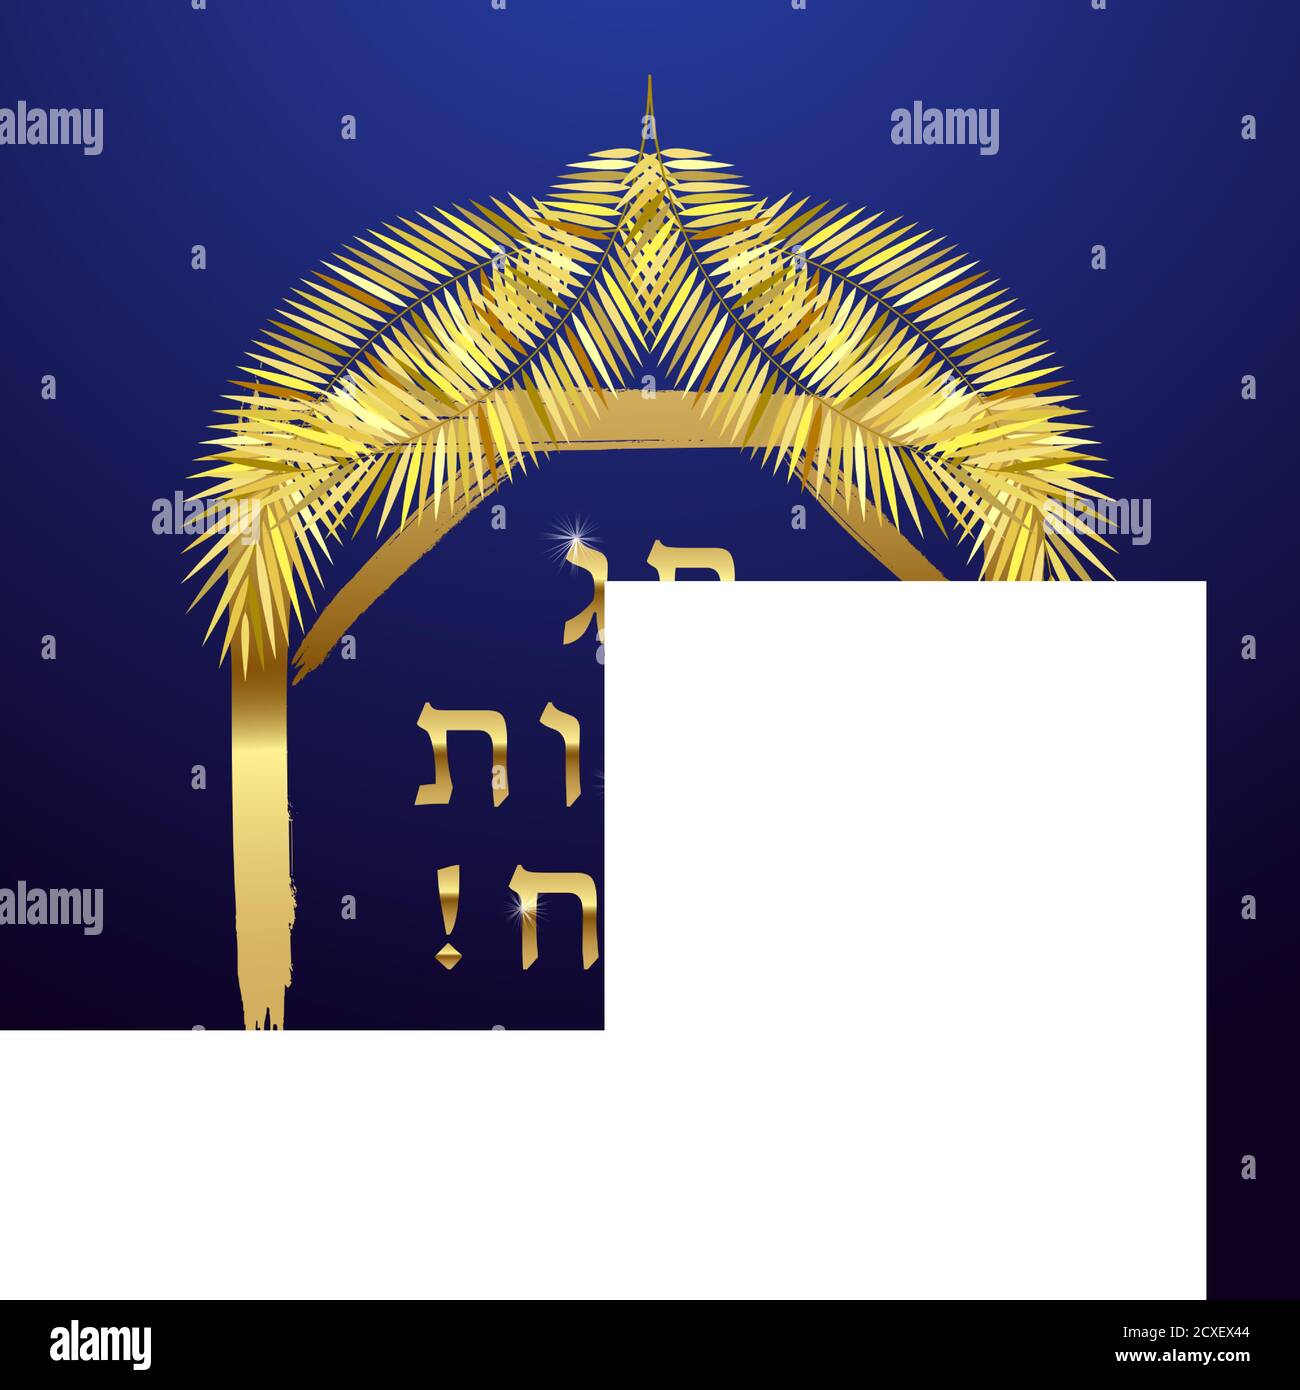 A Happy Sukkot card concept. Text in Hebrew, Jewish traditional holiday. Decorative festive Yiddish sign. Isolated abstract graphic design template. Stock Vector